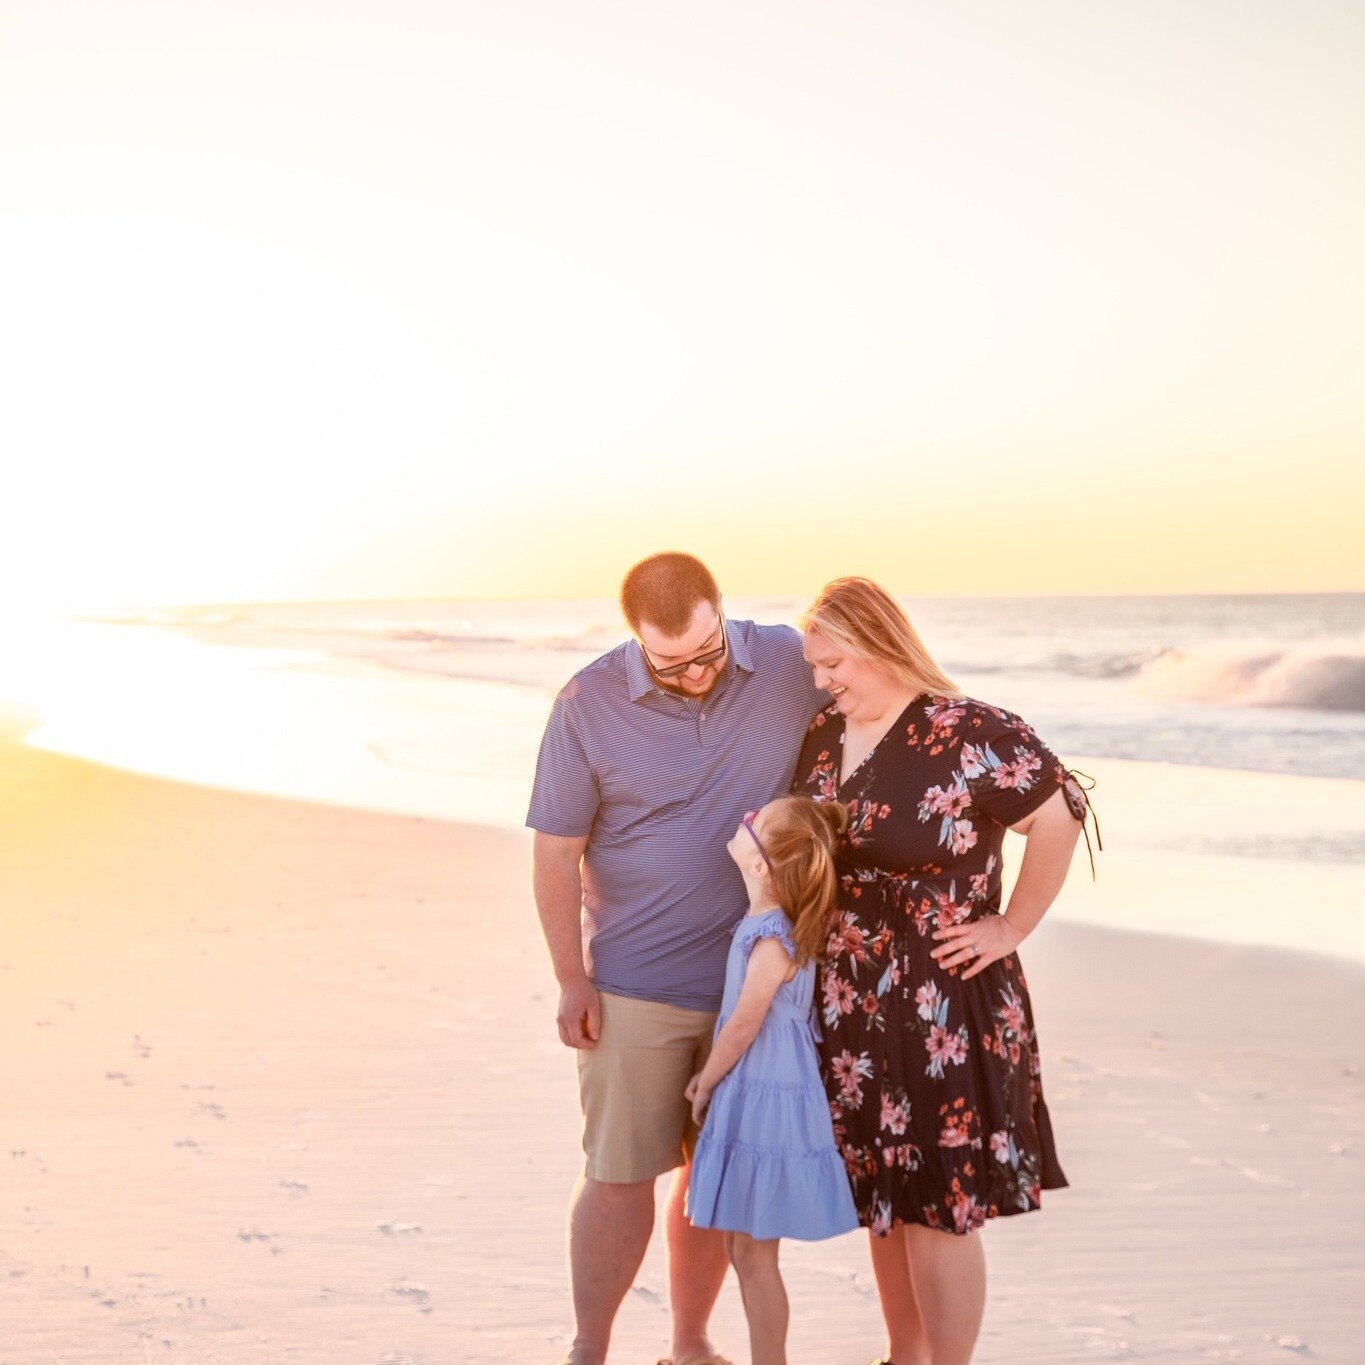 Sunny mornings on Navarre Beach! Have you booked yours?

https://www.jessicasalortphotos.com/sunrise-morning-mini-sessions

📞Contact Jessica Salort for all your photo needs! (850)313-1586

&ldquo;Your #1 choice in all things photo!&rdquo; 📸

www.je